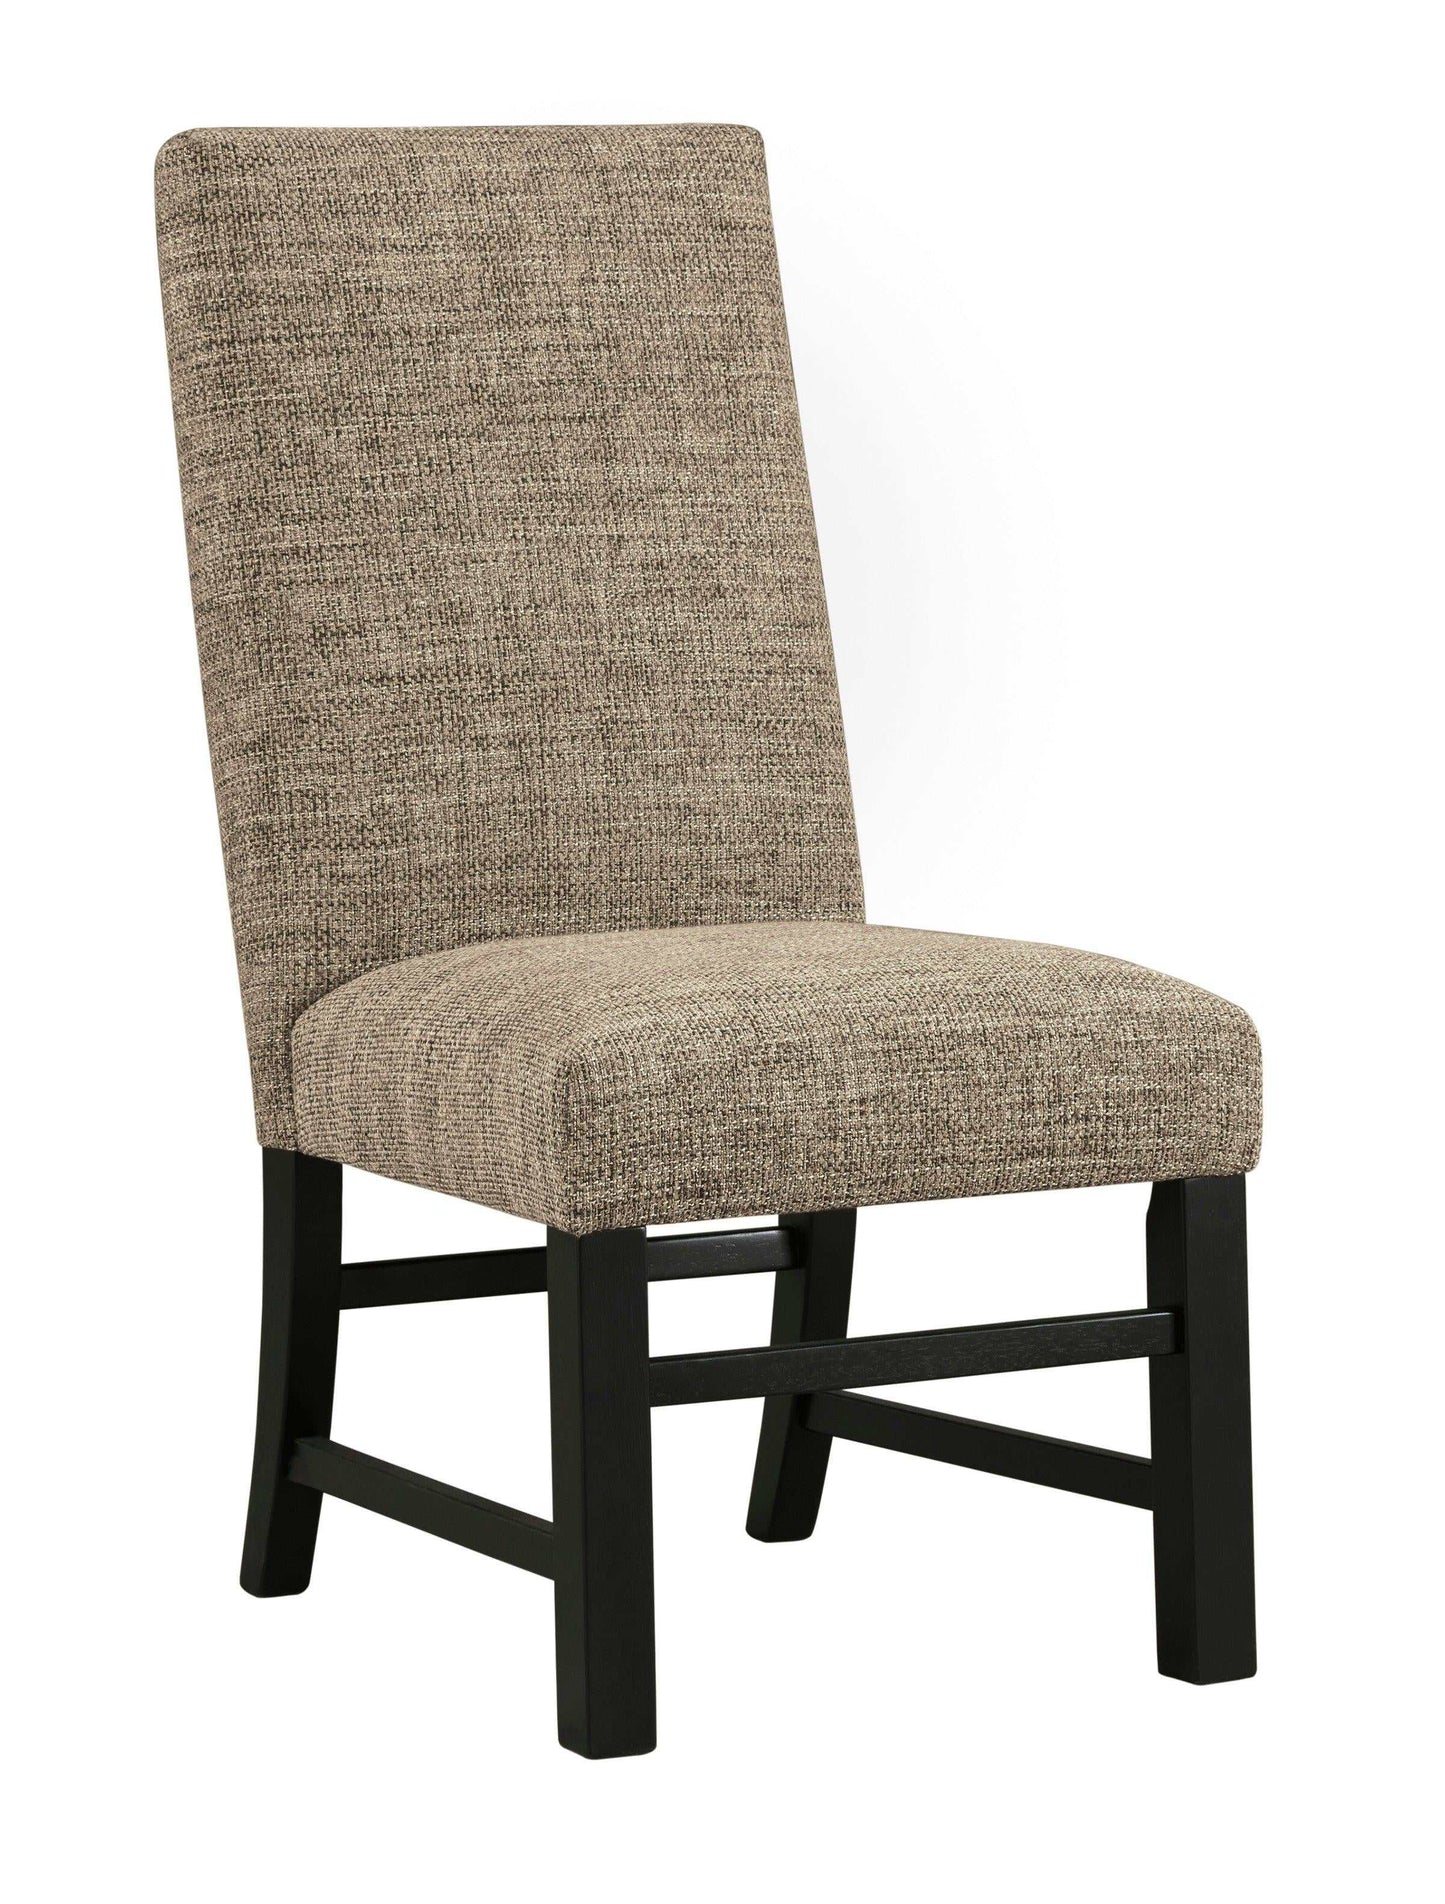 Sommerford Black & Brown Dining Side Chair (Set of 2)